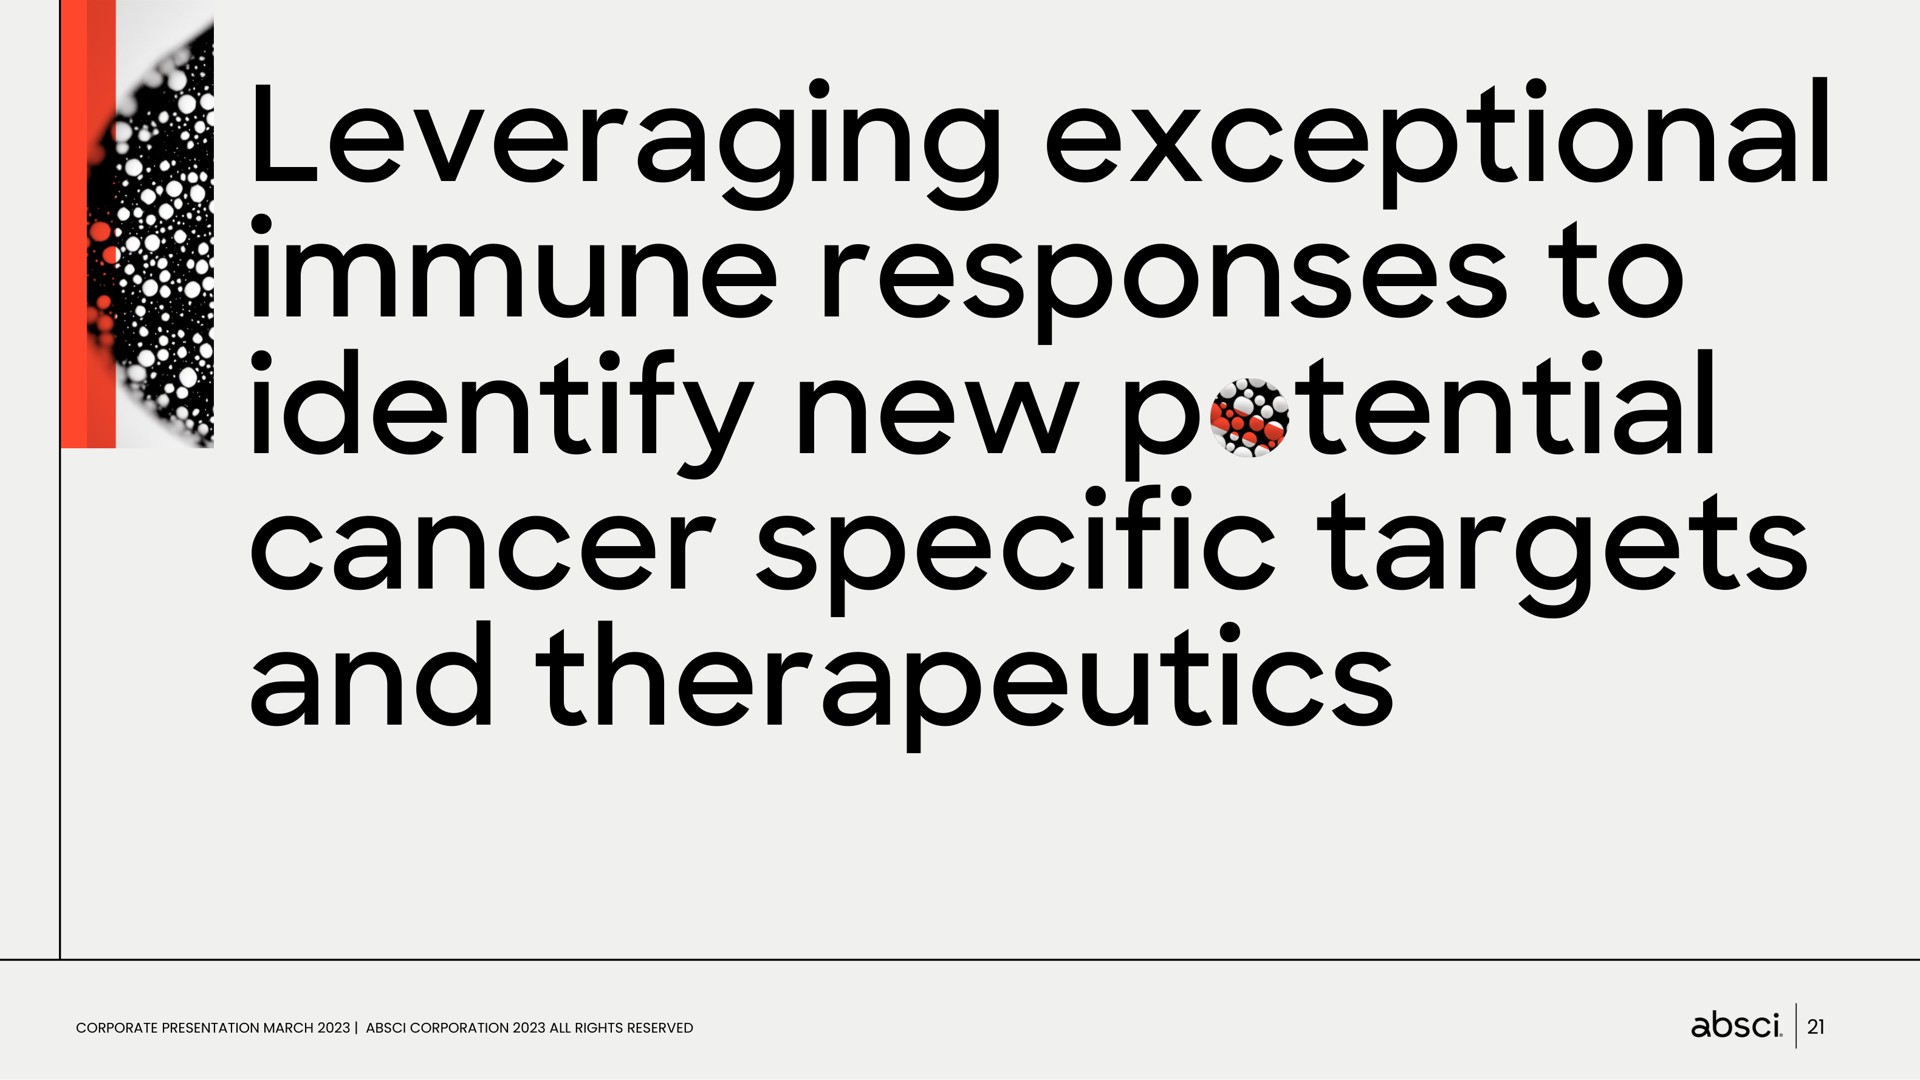 leveraging exceptional immune responses to identify new potential cancer specific targets and therapeutics | Absci